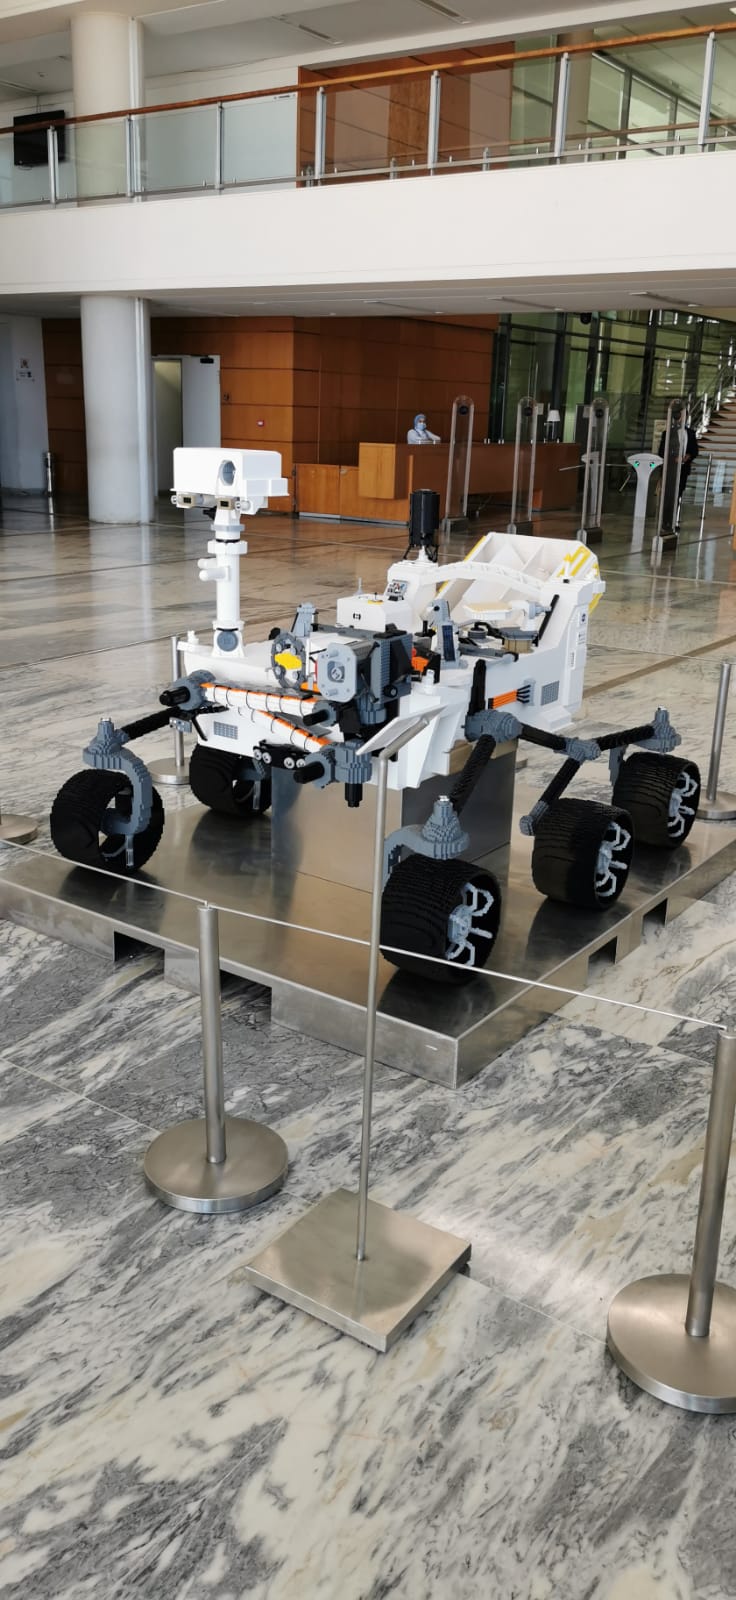 Mars Rover Perseverance by Lego